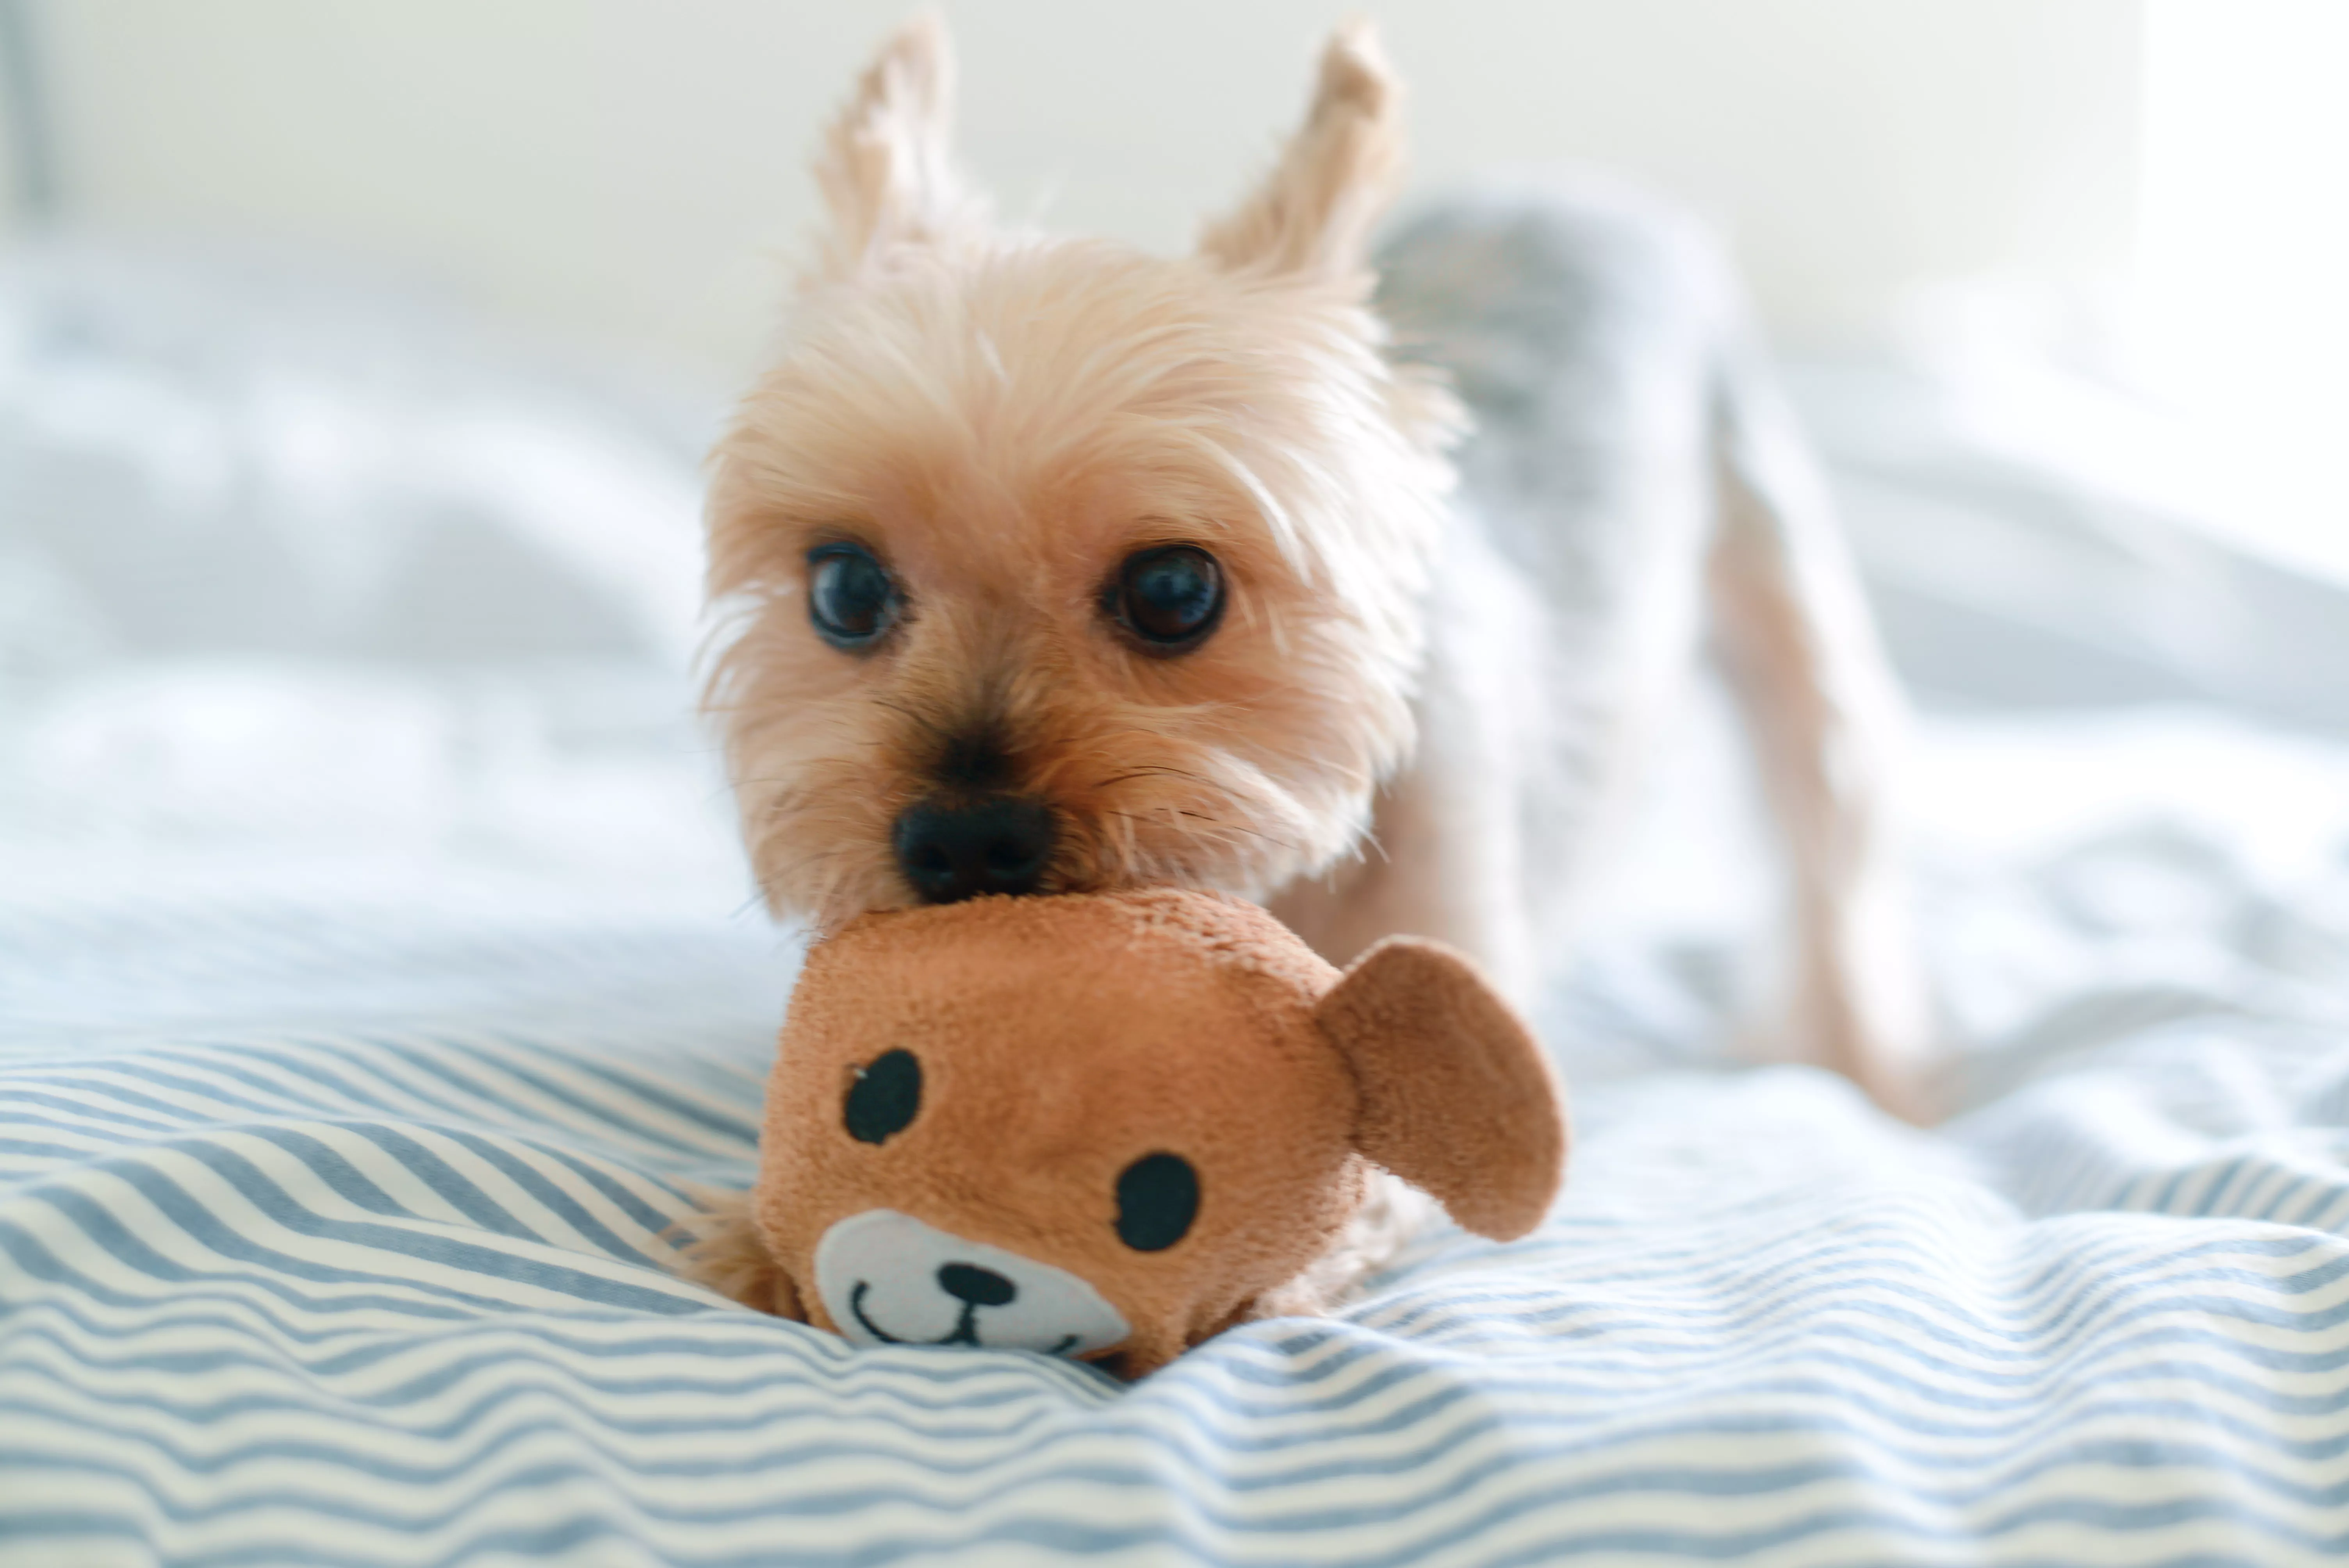 Yorkie playing with teddy toy